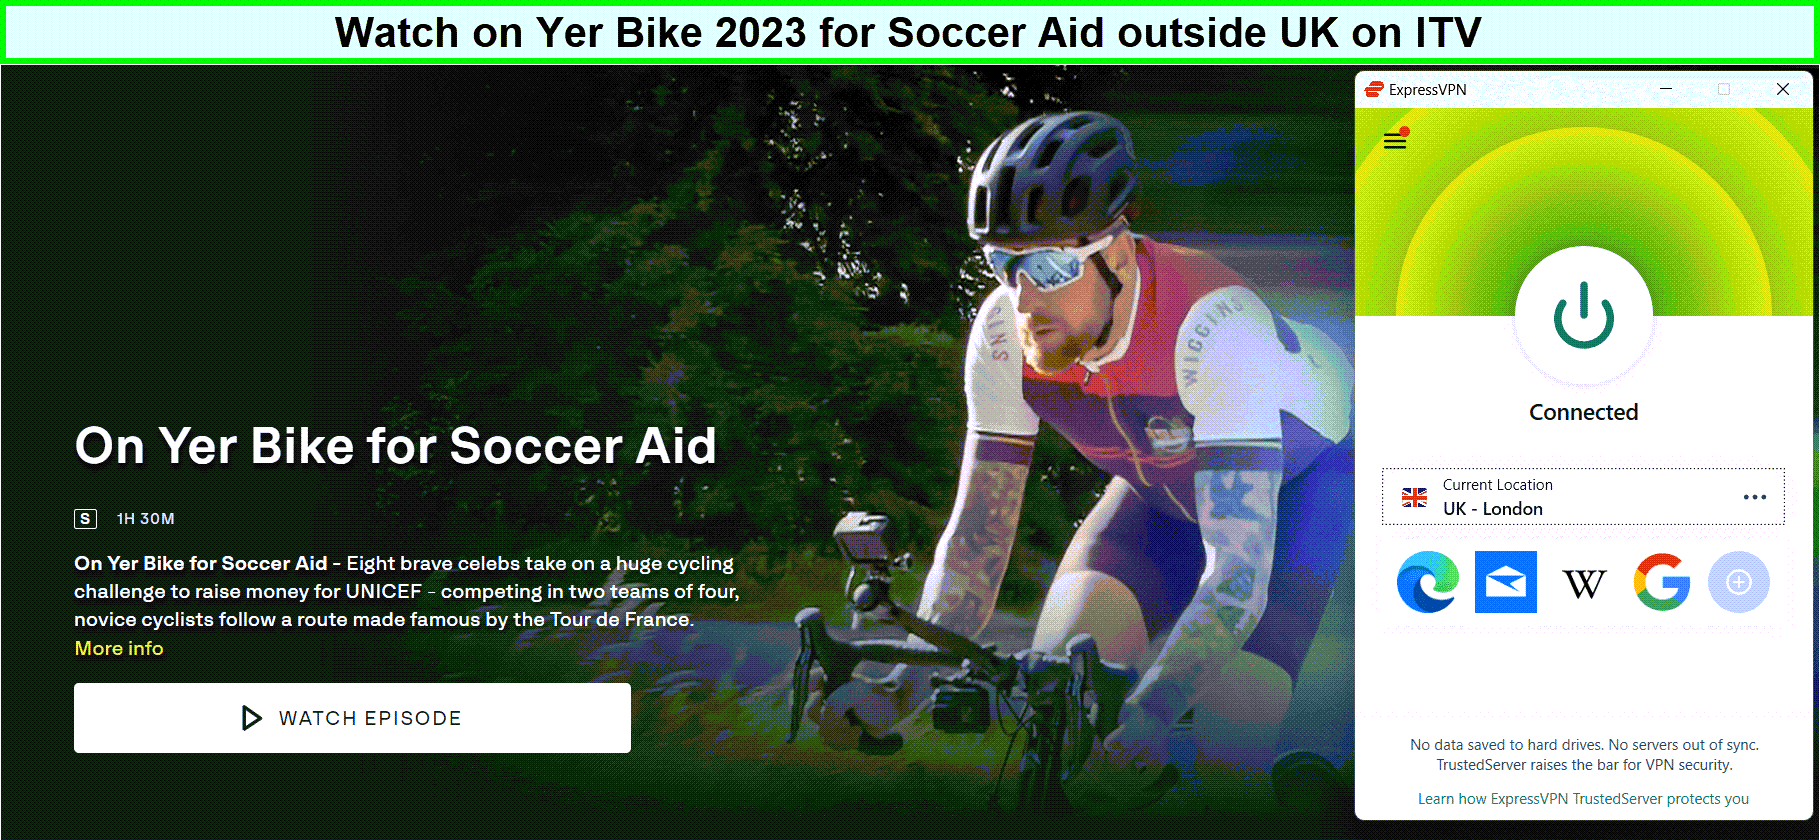 Watch-On-Yer-Bike-2023-for-Soccer-Aid-in-Netherlands-on-ITV-with-ExpressVPN